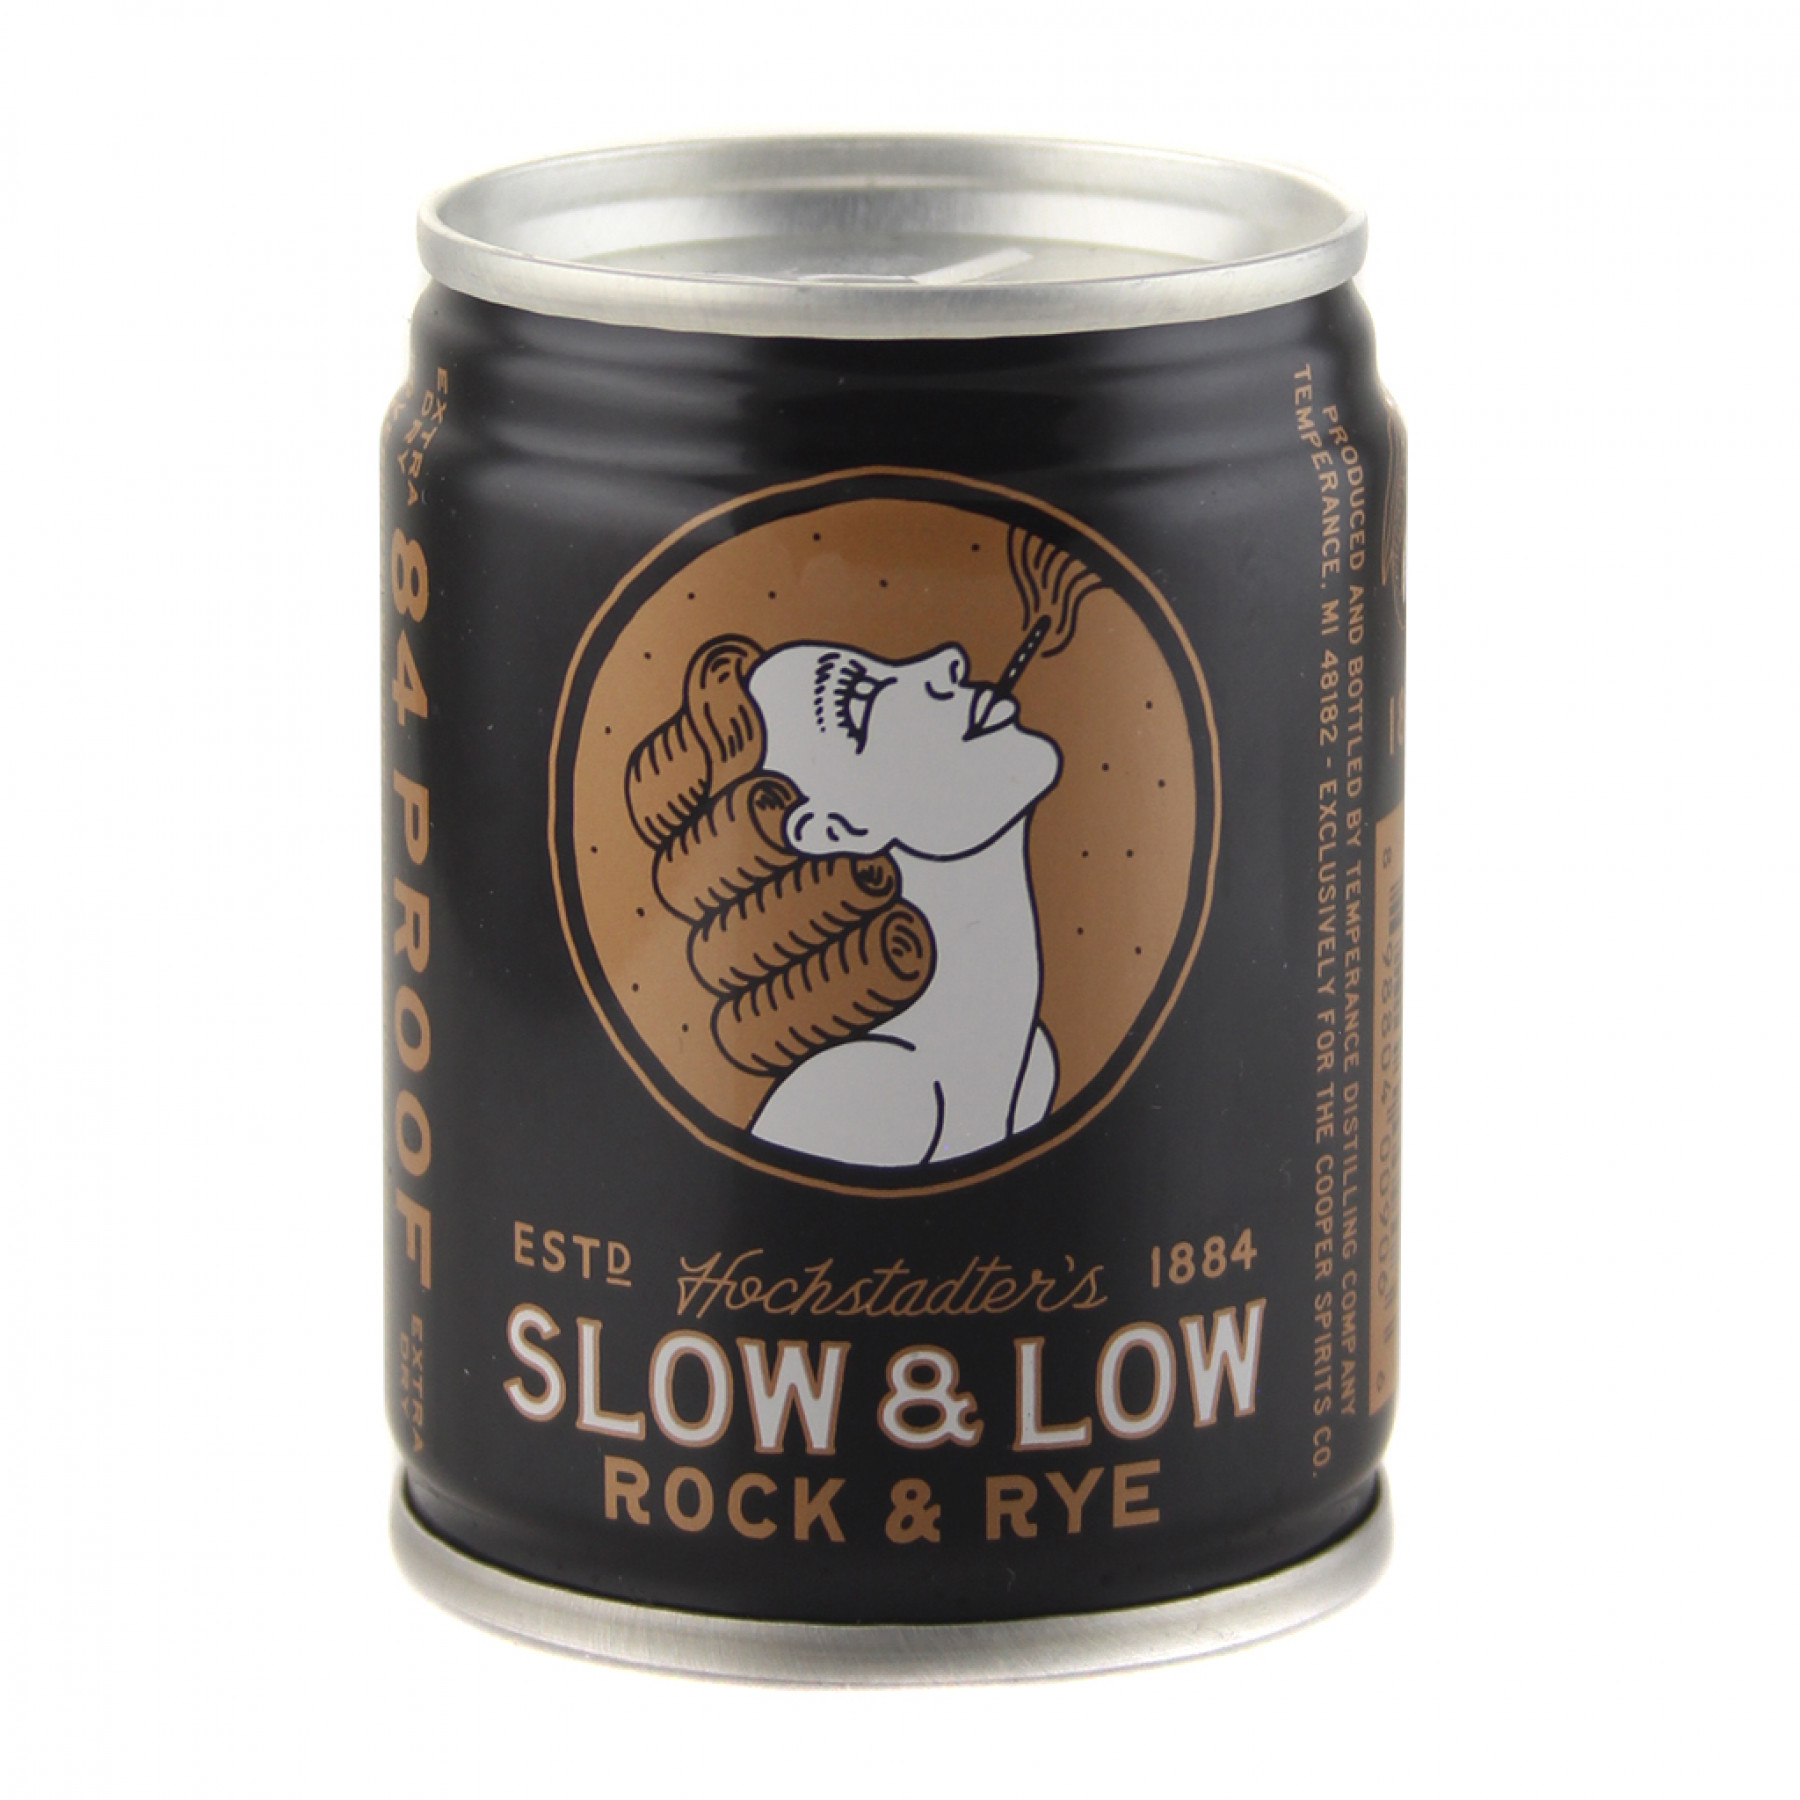 1. Hochstadter's Slow & Low Rock and Rye